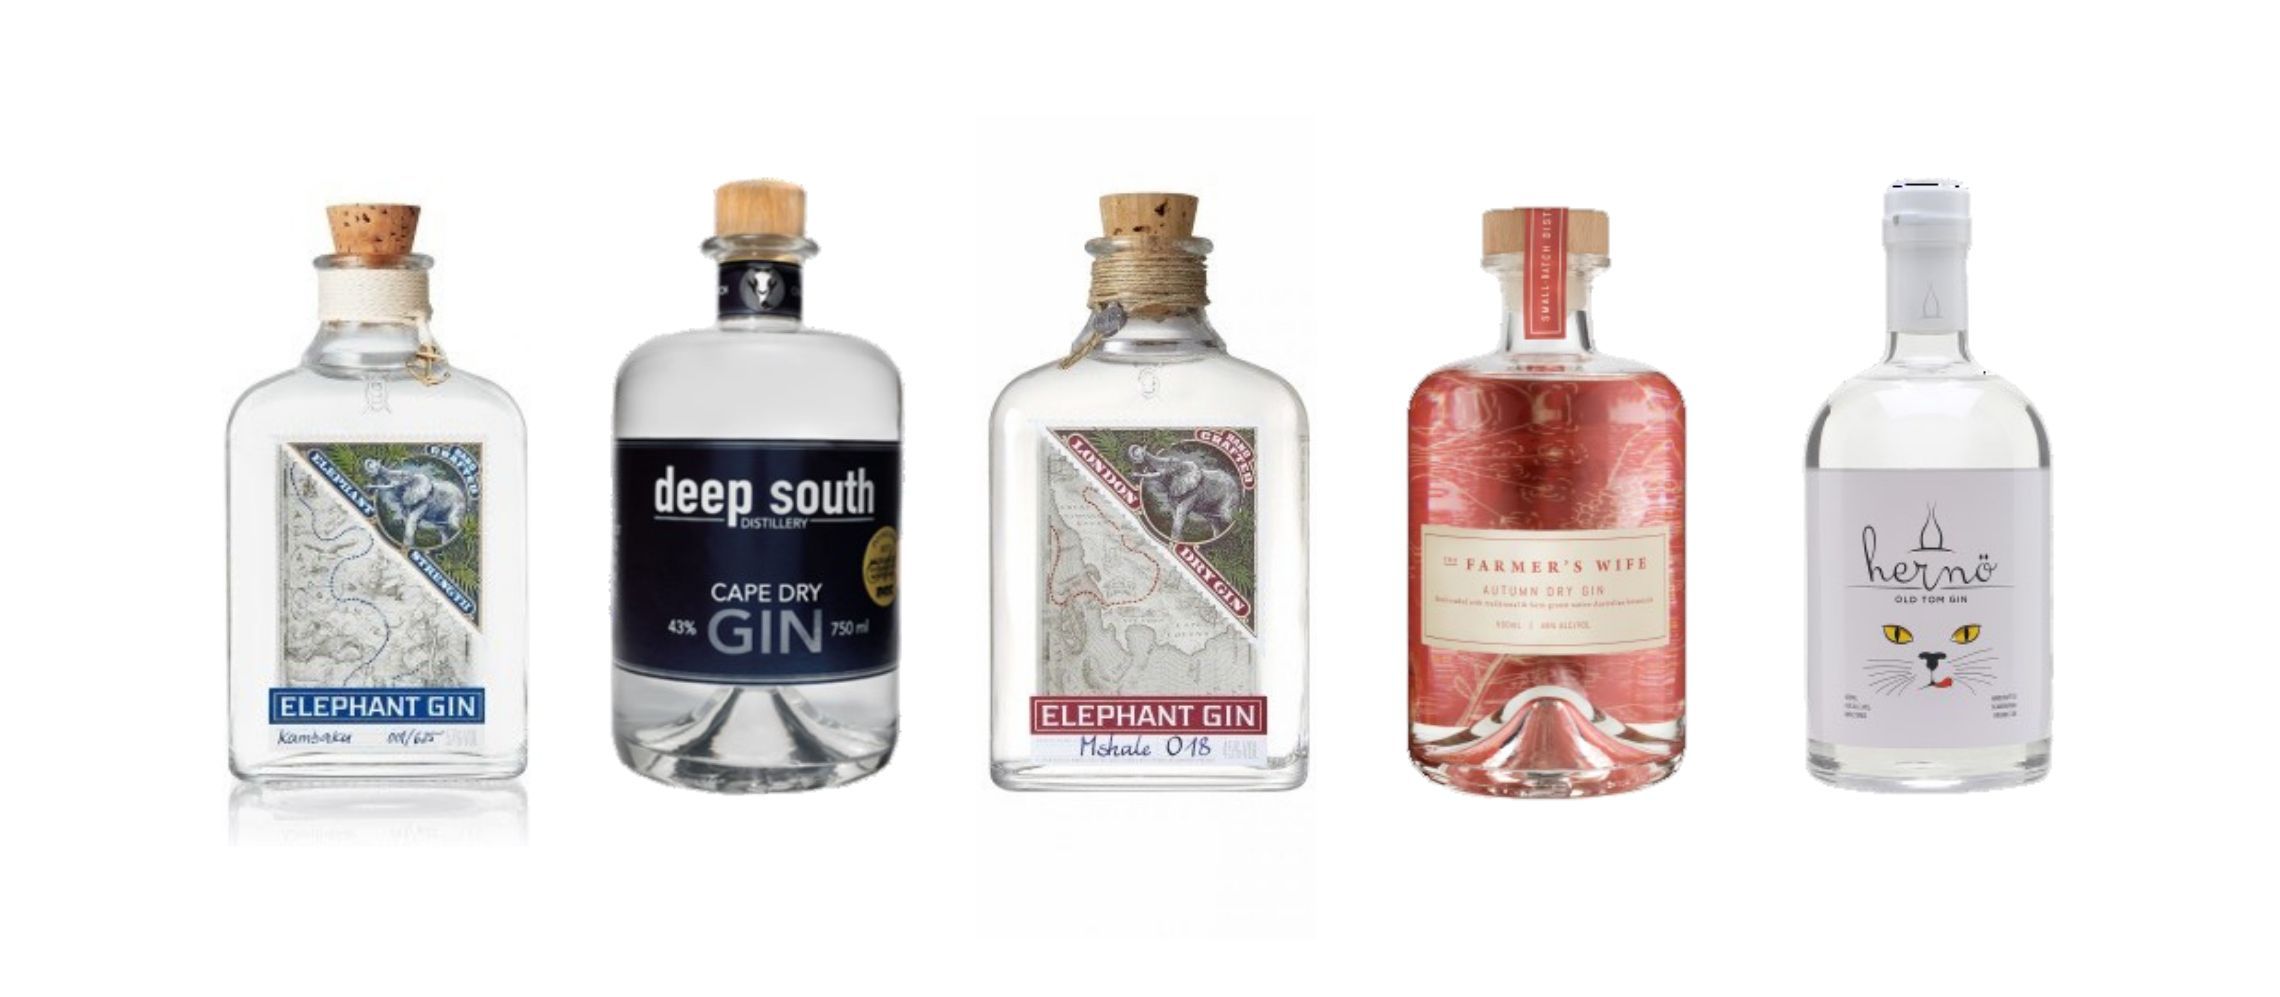 Photo for: Gins to Try on World Gin Day